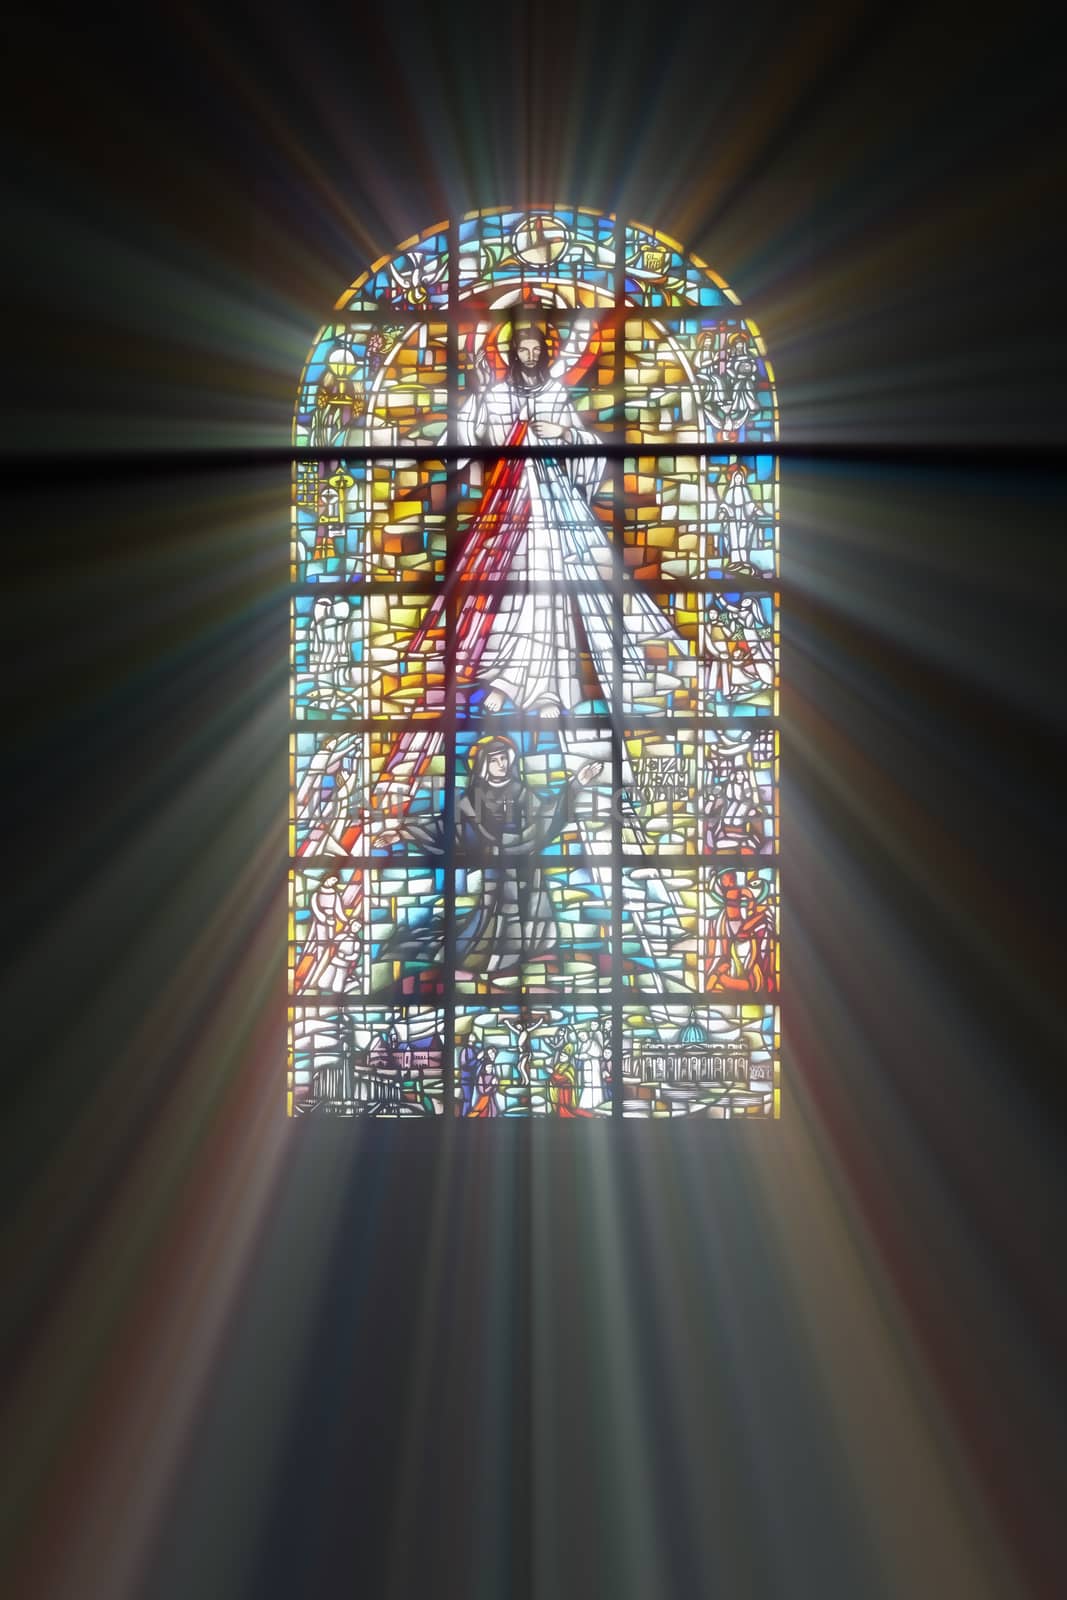 Biblical stained glass with rays of light shining through